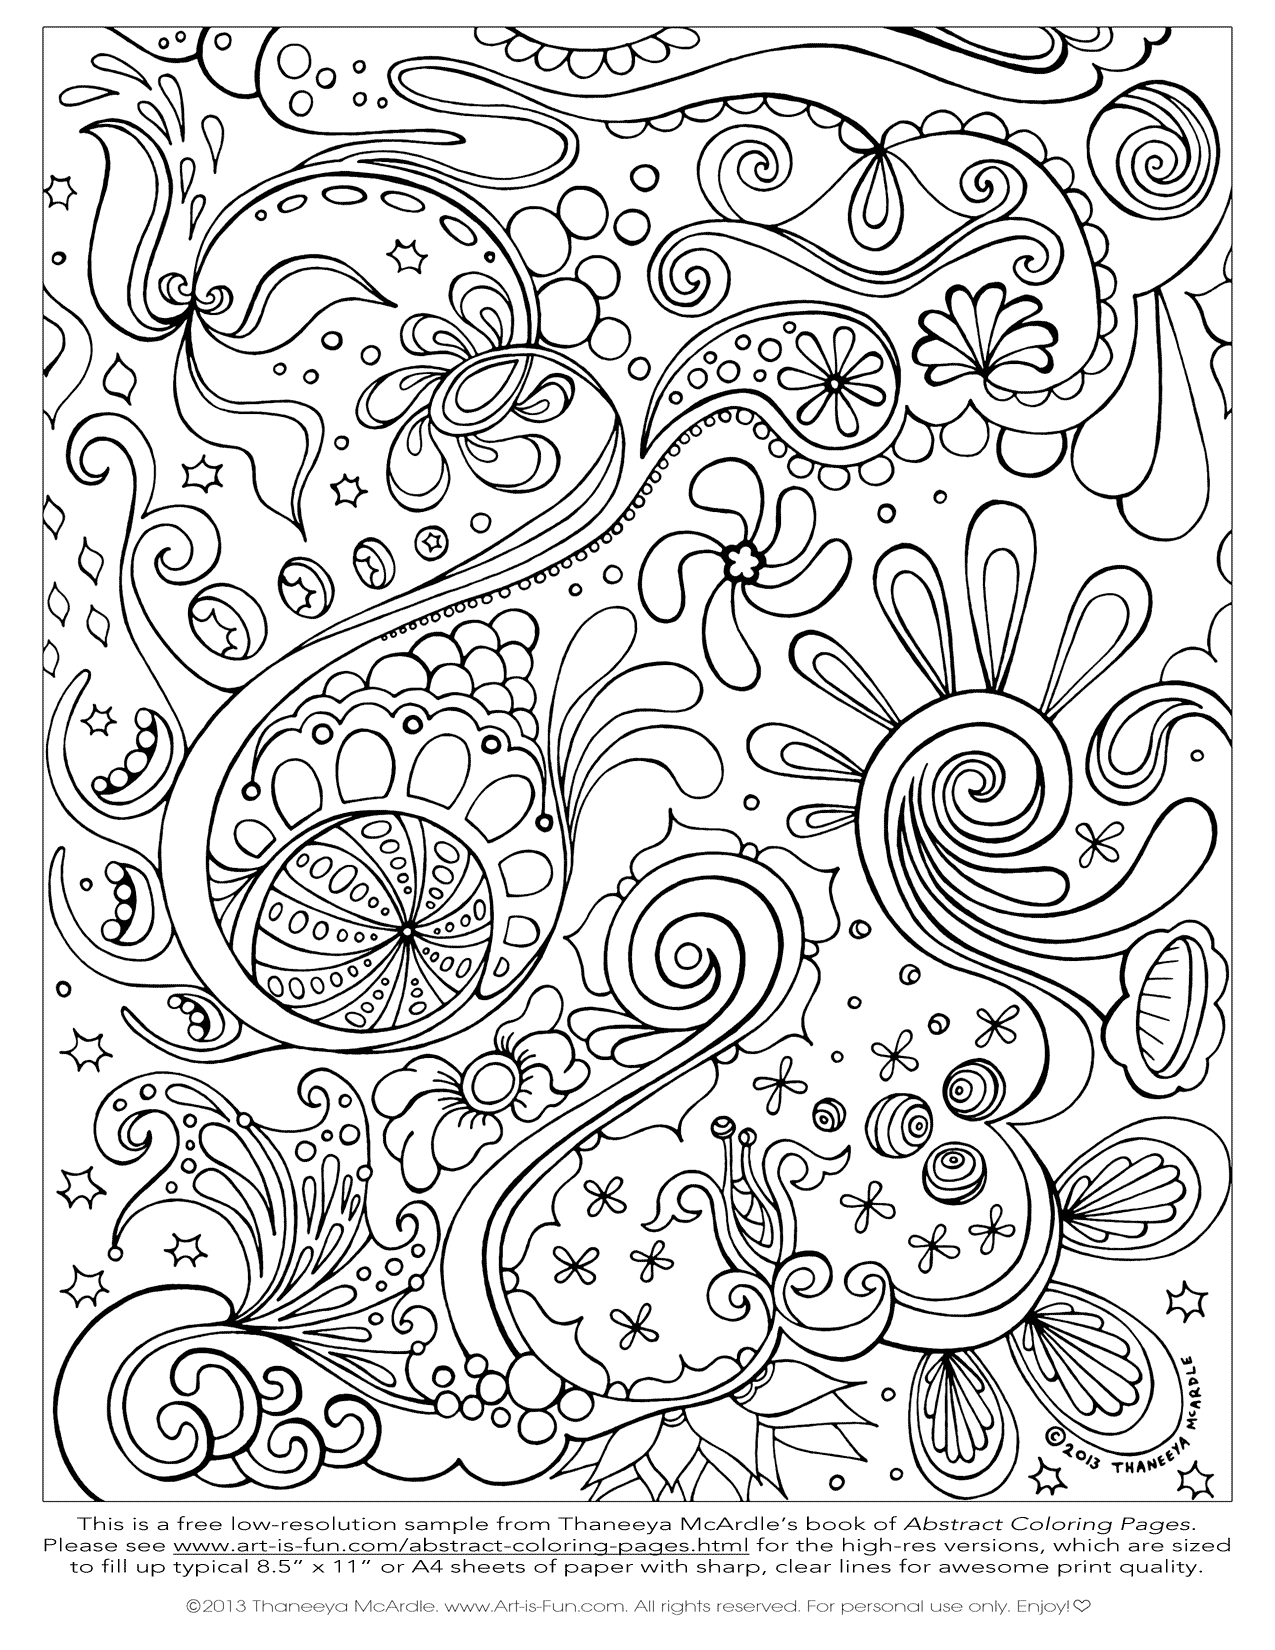 goal welfare machine free abstract coloring pages to print napkin ...